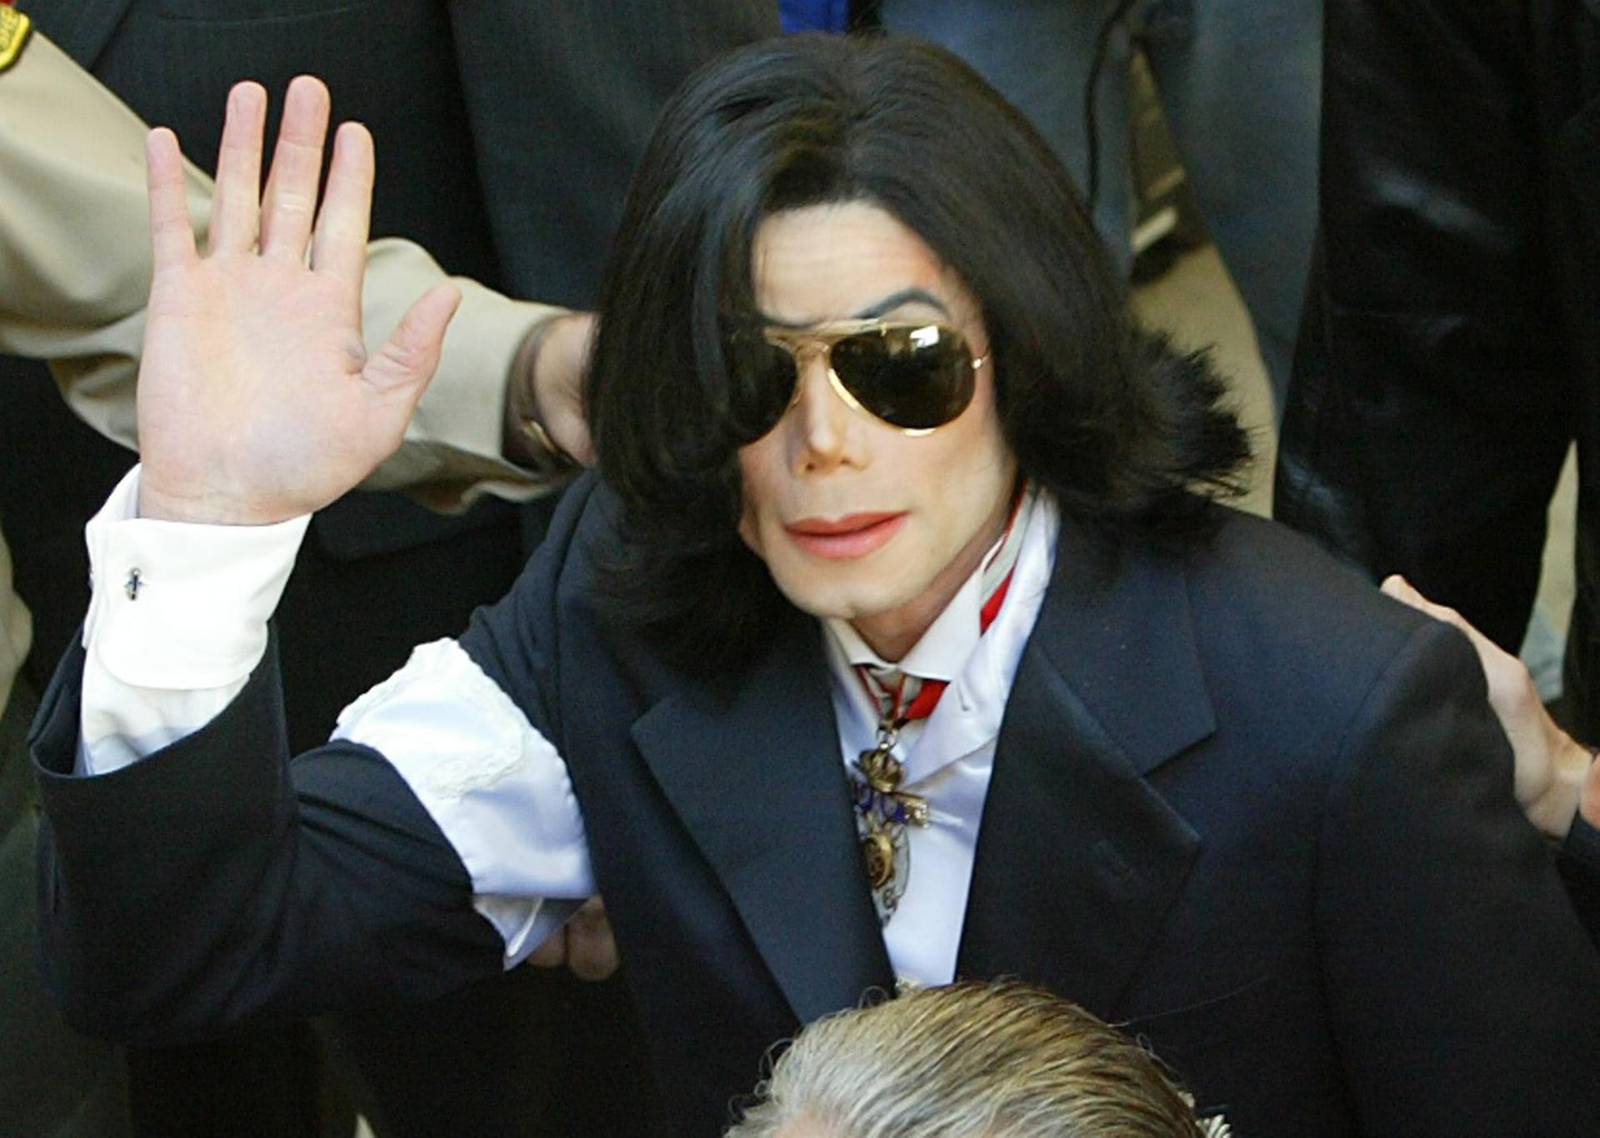 60 things you may not have known about Michael Jackson